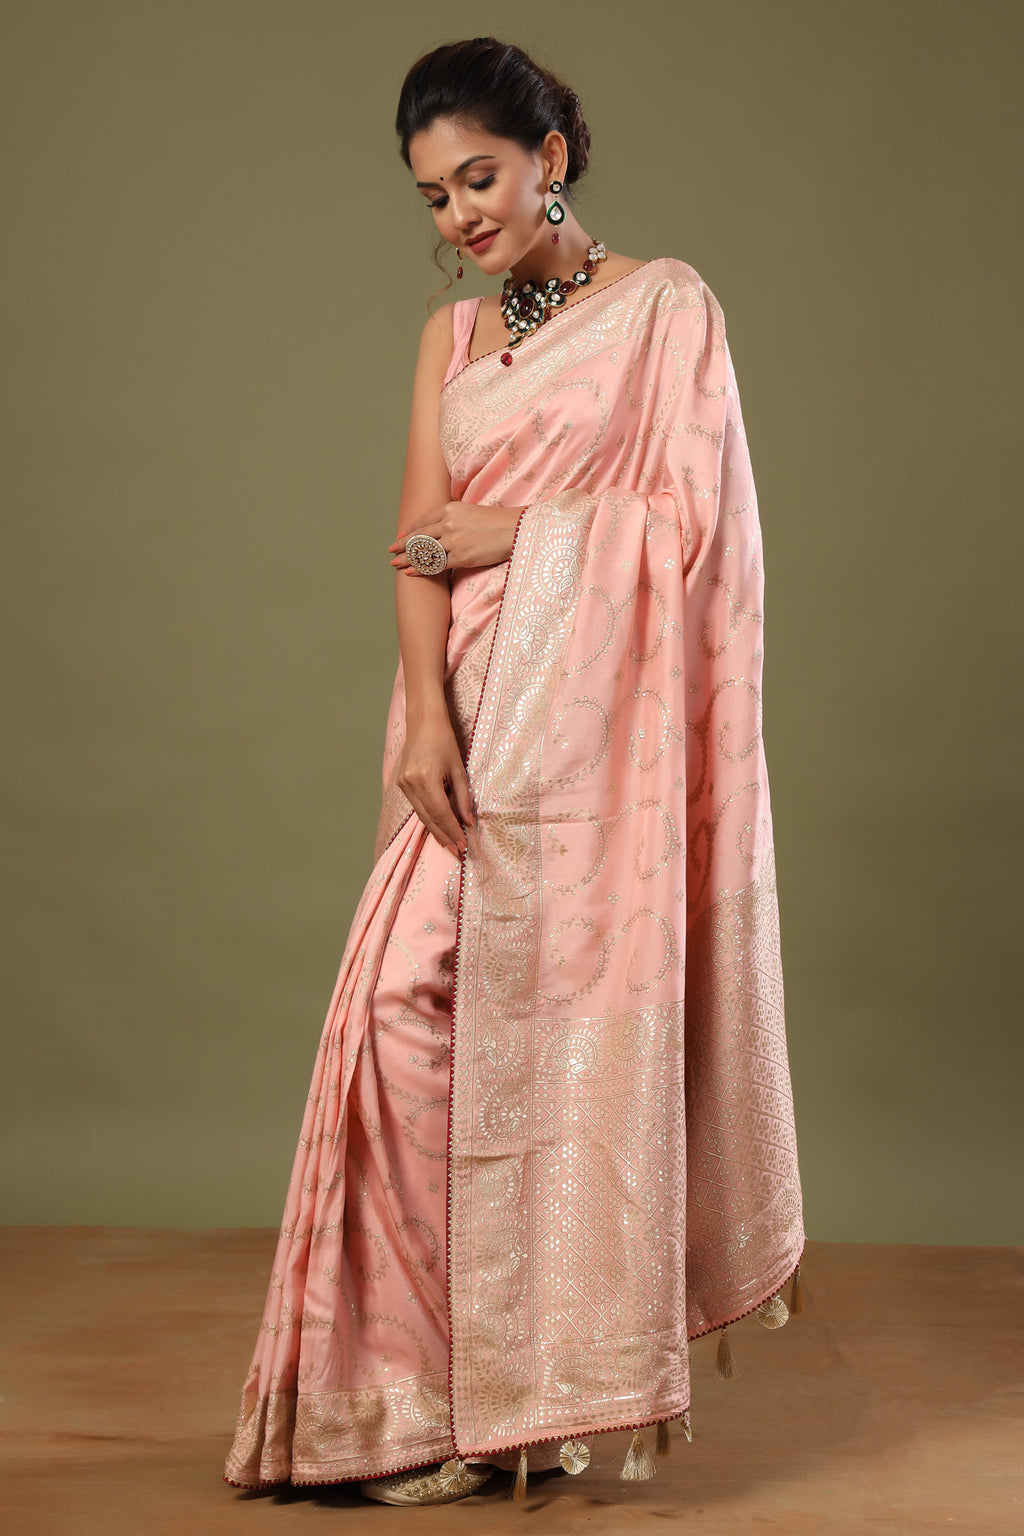 Buy beautiful light pink tussar georgette sari online in USA. Make a fashion statement at weddings with stunning designer sarees, embroidered sarees with blouse, wedding sarees, handloom sarees from Pure Elegance Indian fashion store in USA.-full view